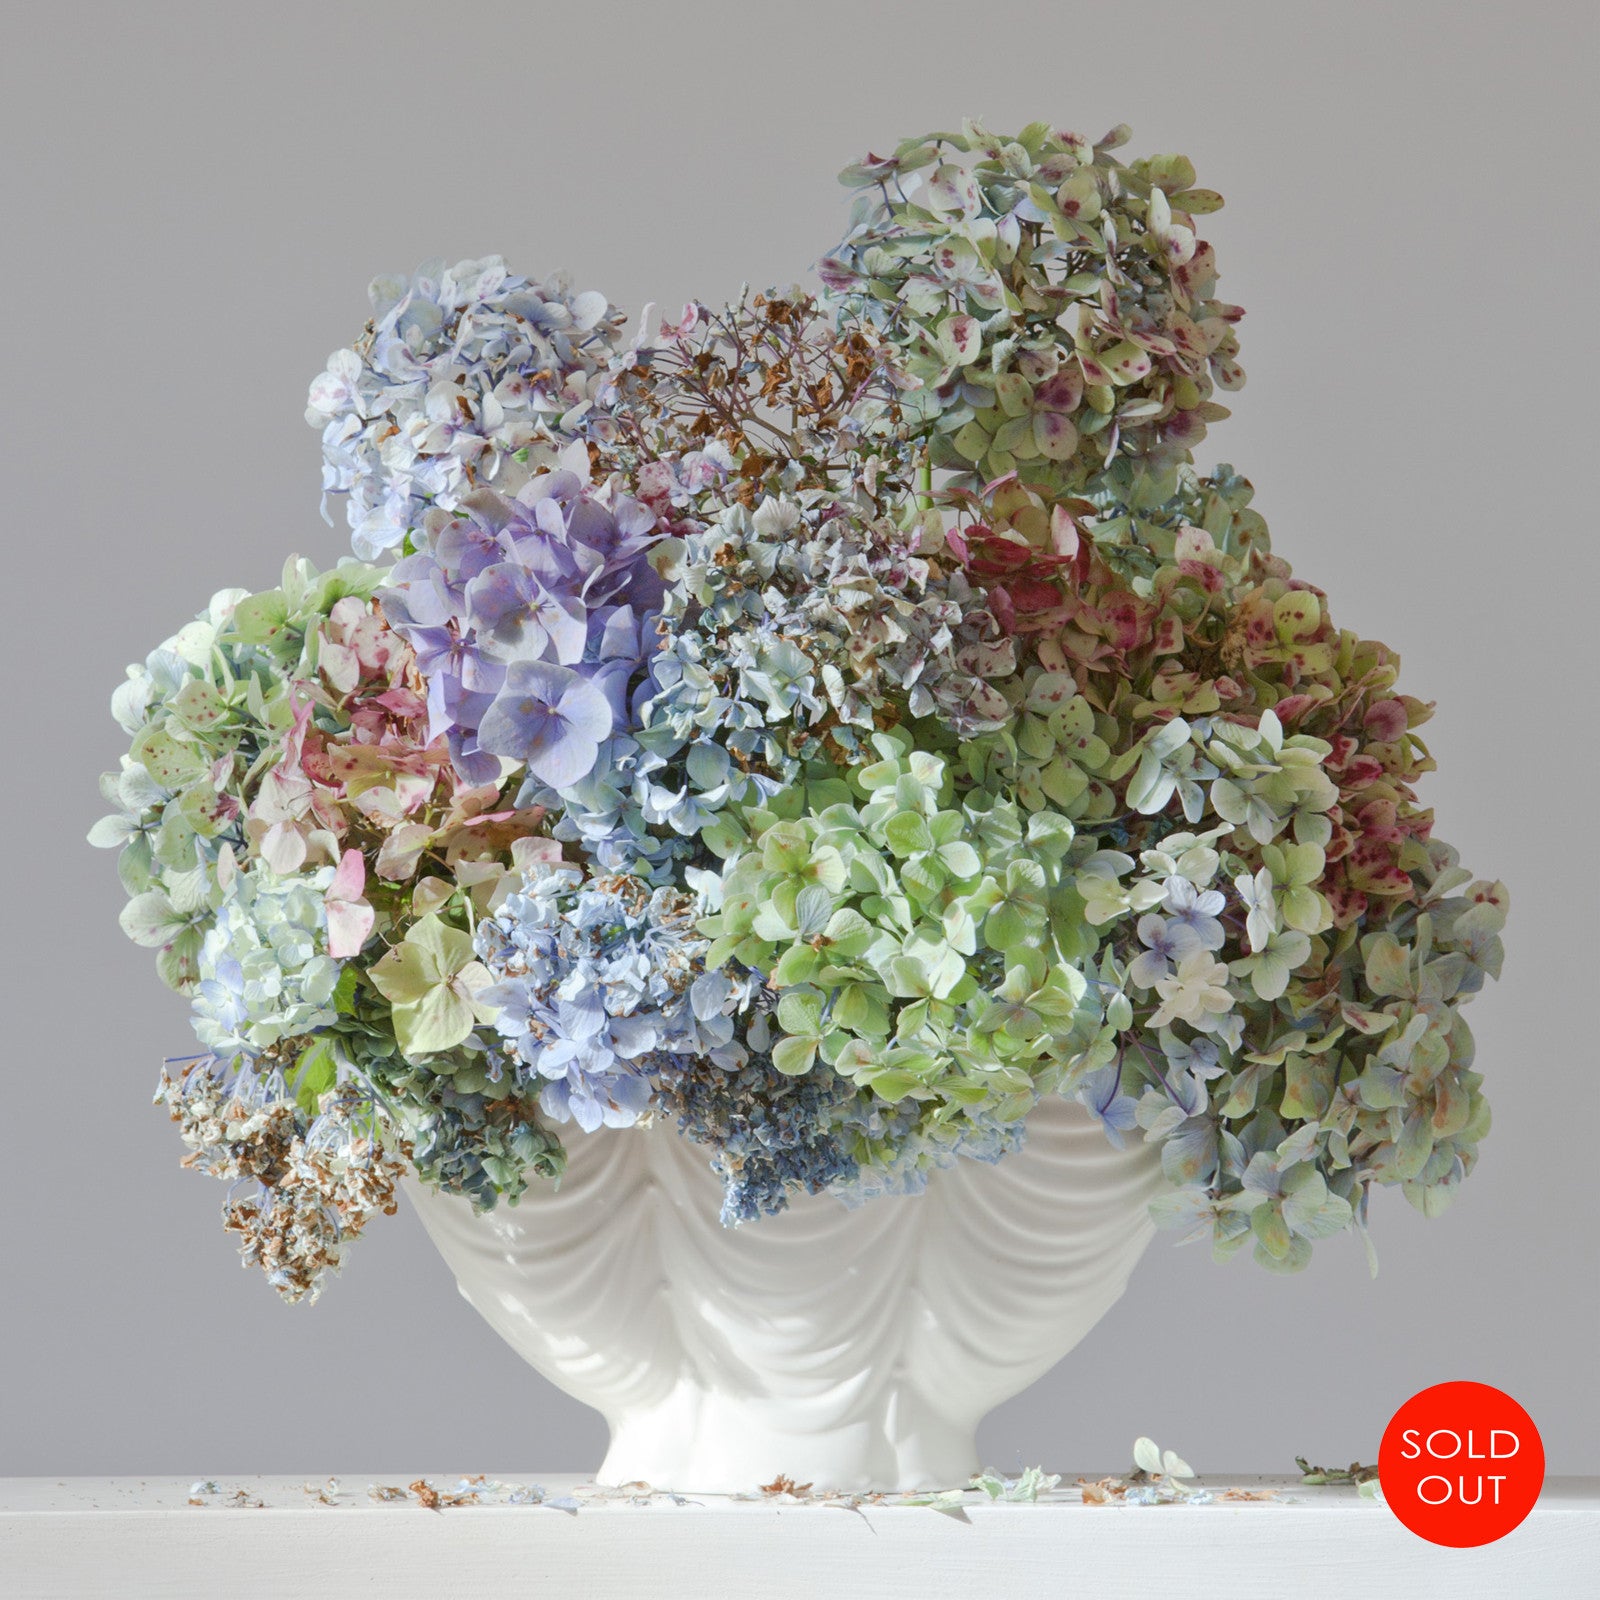 Hydrangeas 9.34 am (sold out)